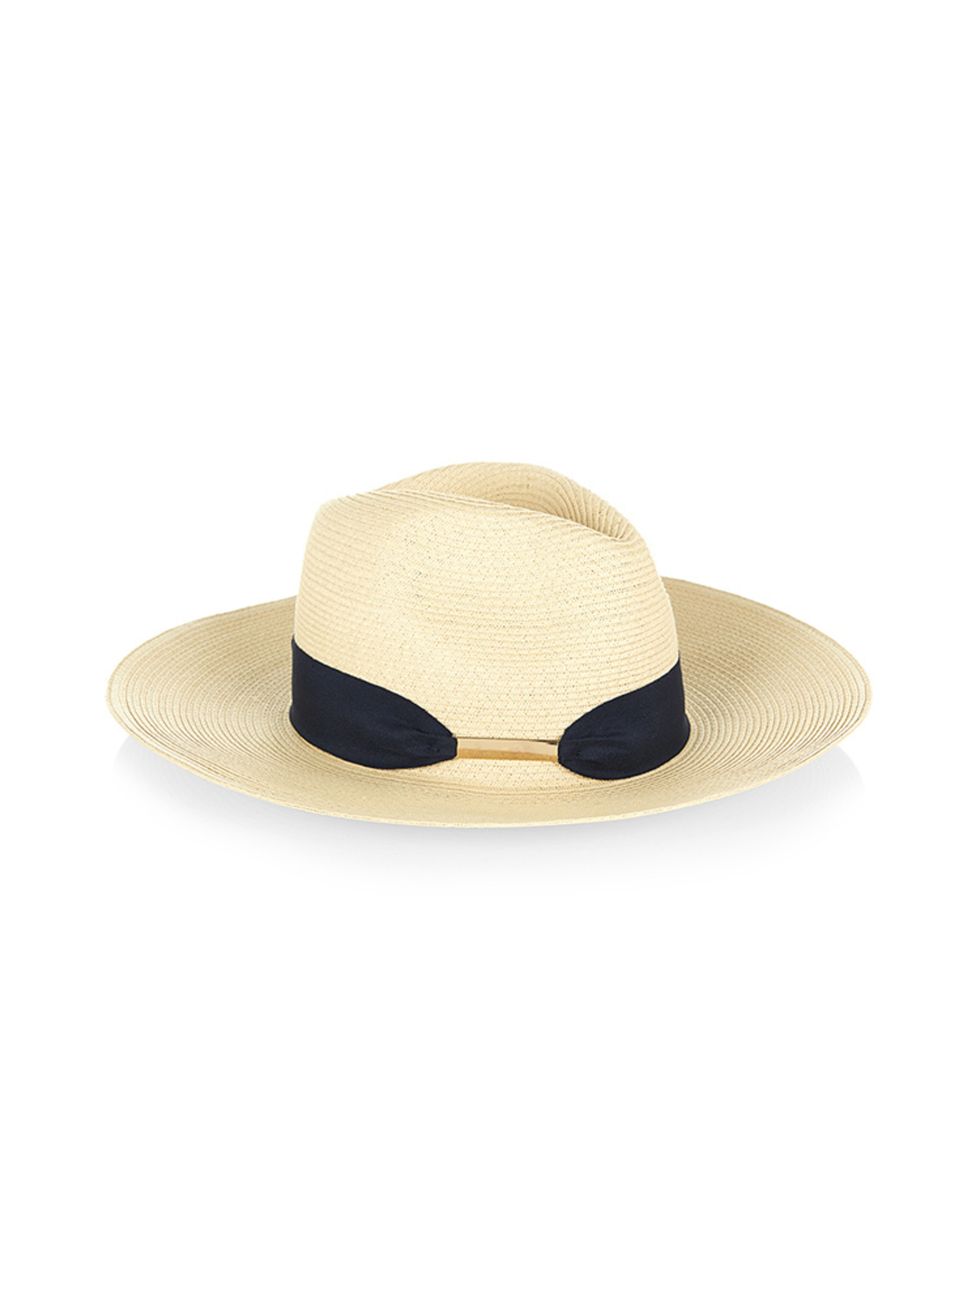 <p><a href="http://media.monsoon.co.uk/medias/sys_master/9012538343454.jpg?buildNumber=4782" target="_blank">Accessorize</a> hat, £19.99</p>